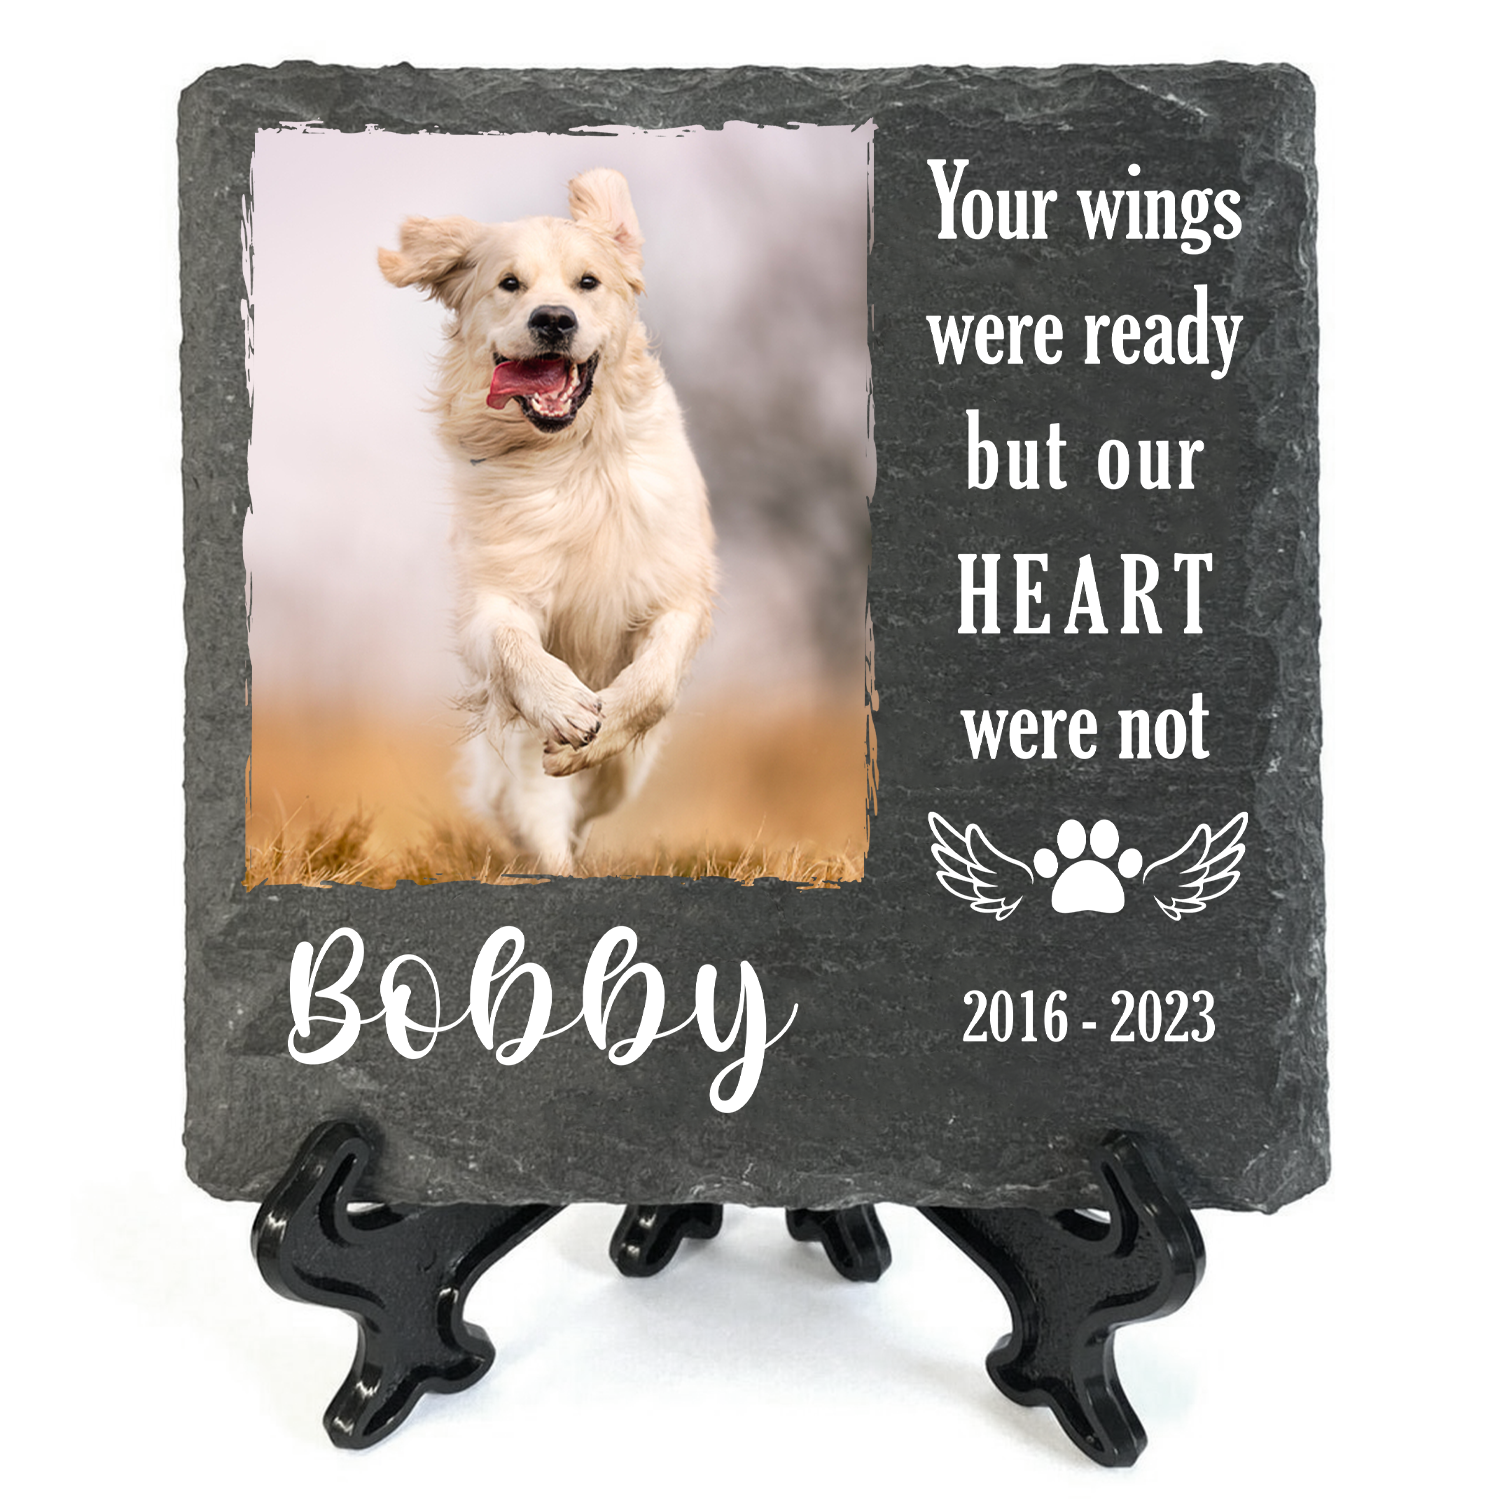 Dog Paw And Pet Photo Your Wings Were Ready Custom Dog Memorial Stone, Pet Memorial Gifts - Personalized Custom Memorial Tombstone